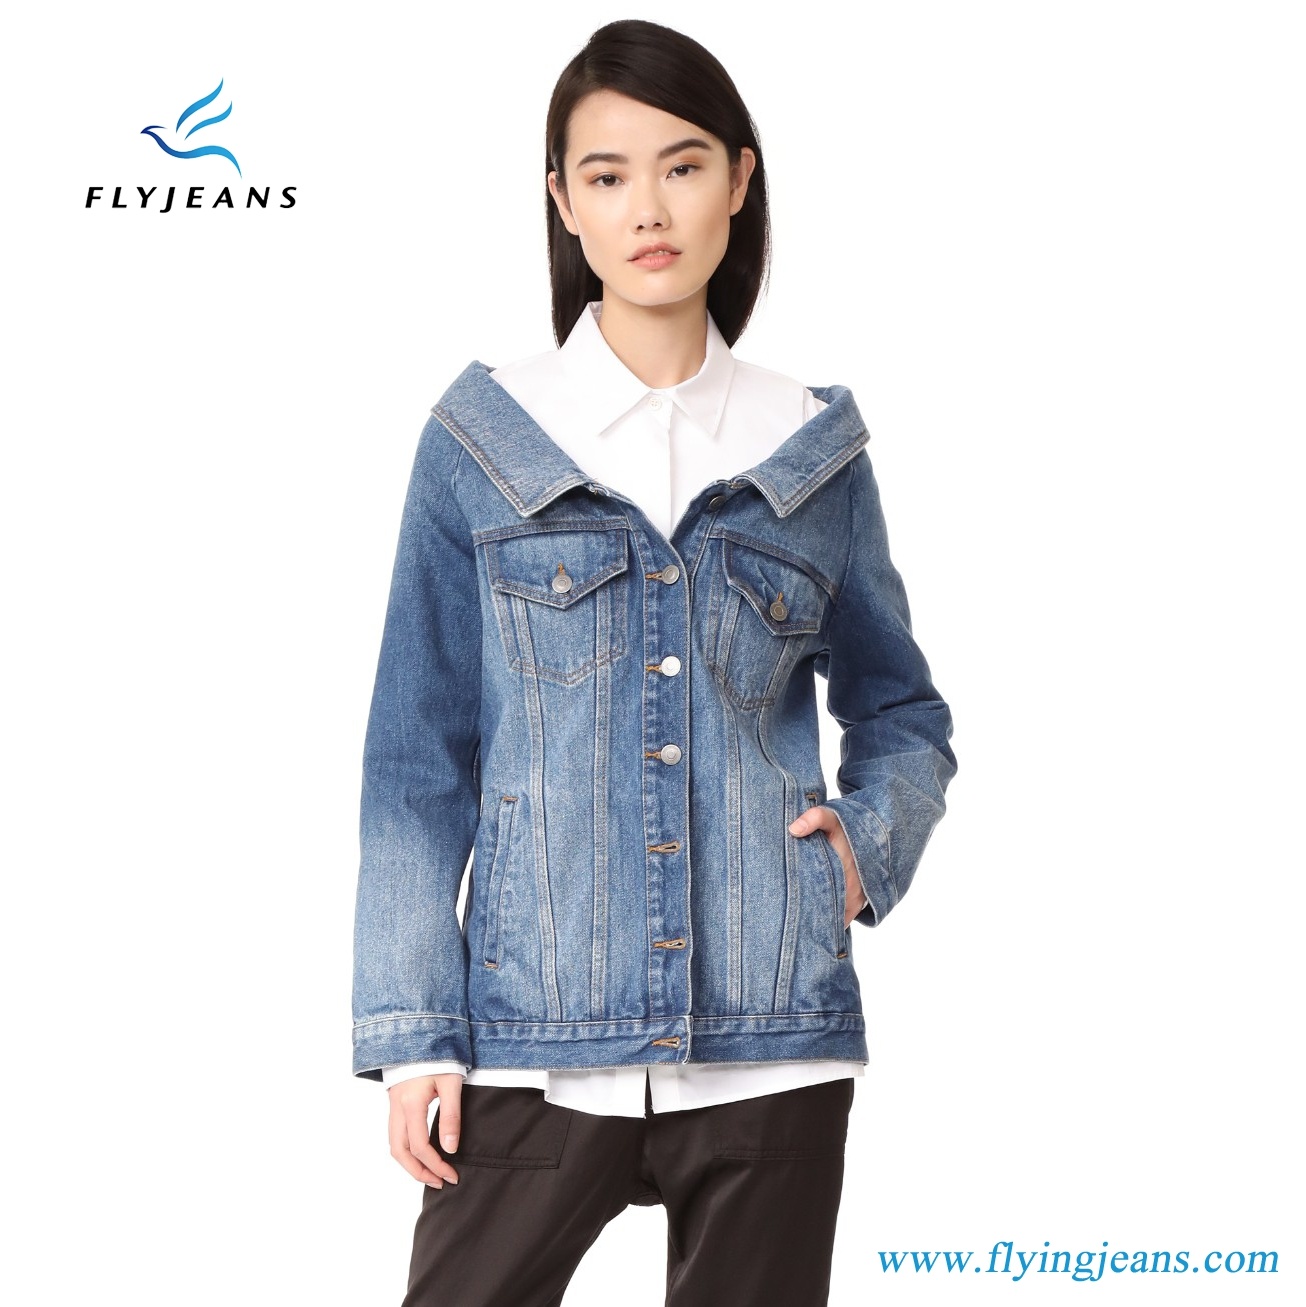 Boxy Denim Jacket for Women and Ladies with a Wide Shoulder-Baring Neckline